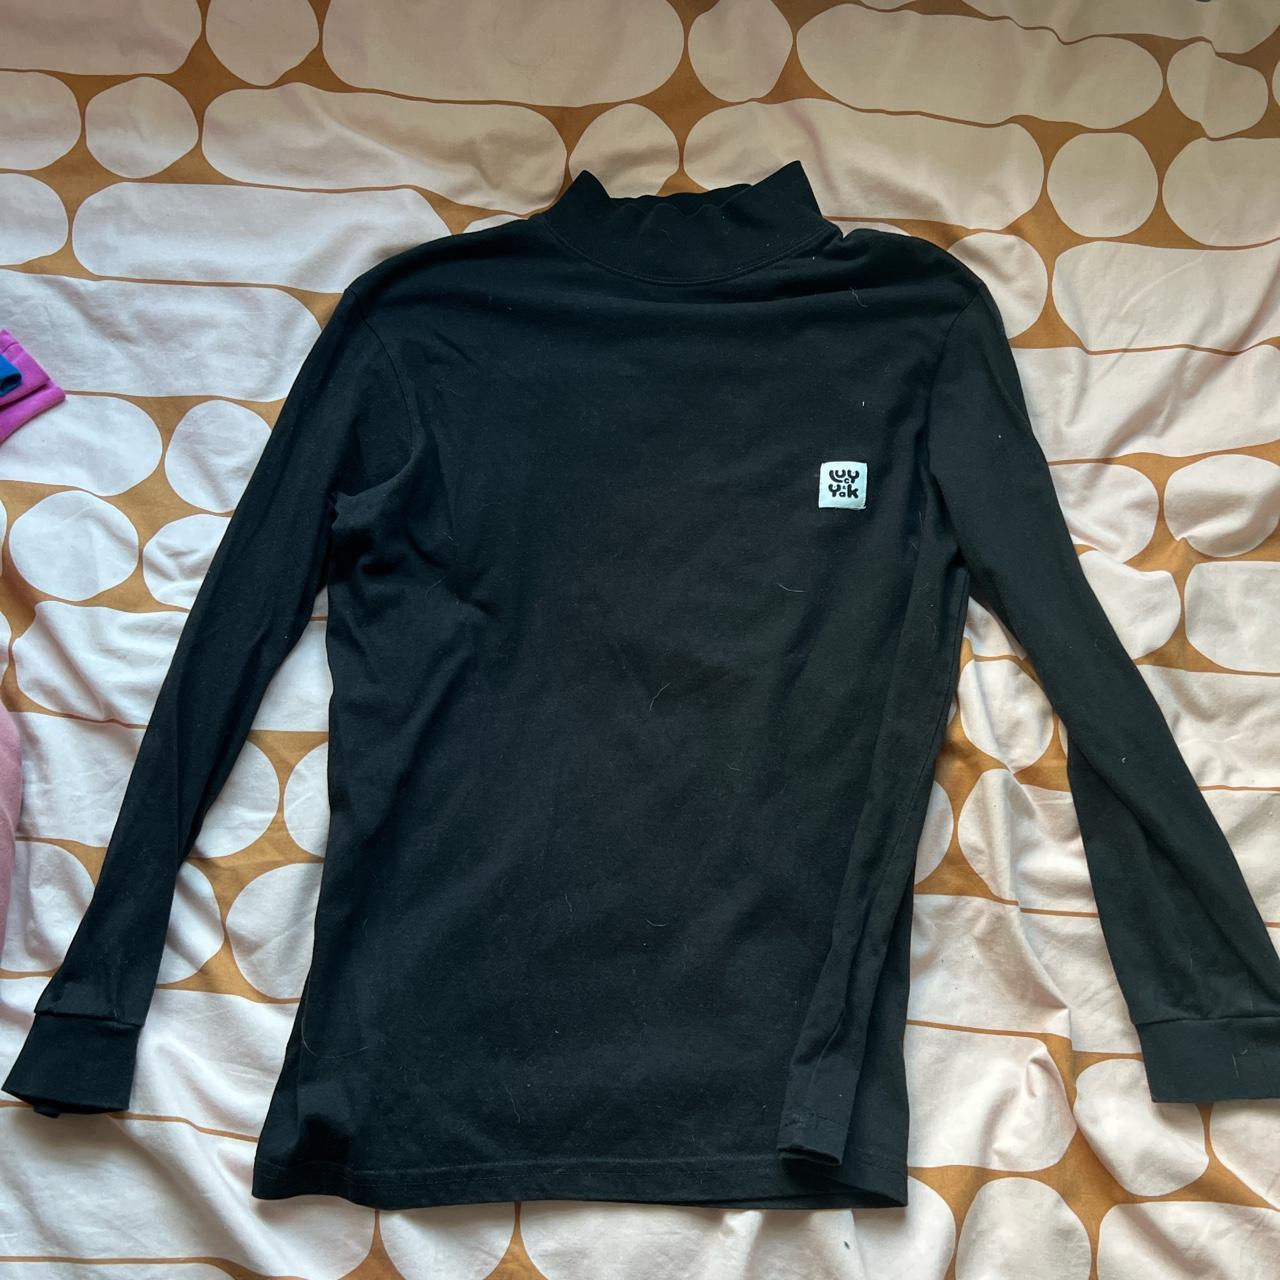 Lucy and yak black turtle neck - Depop